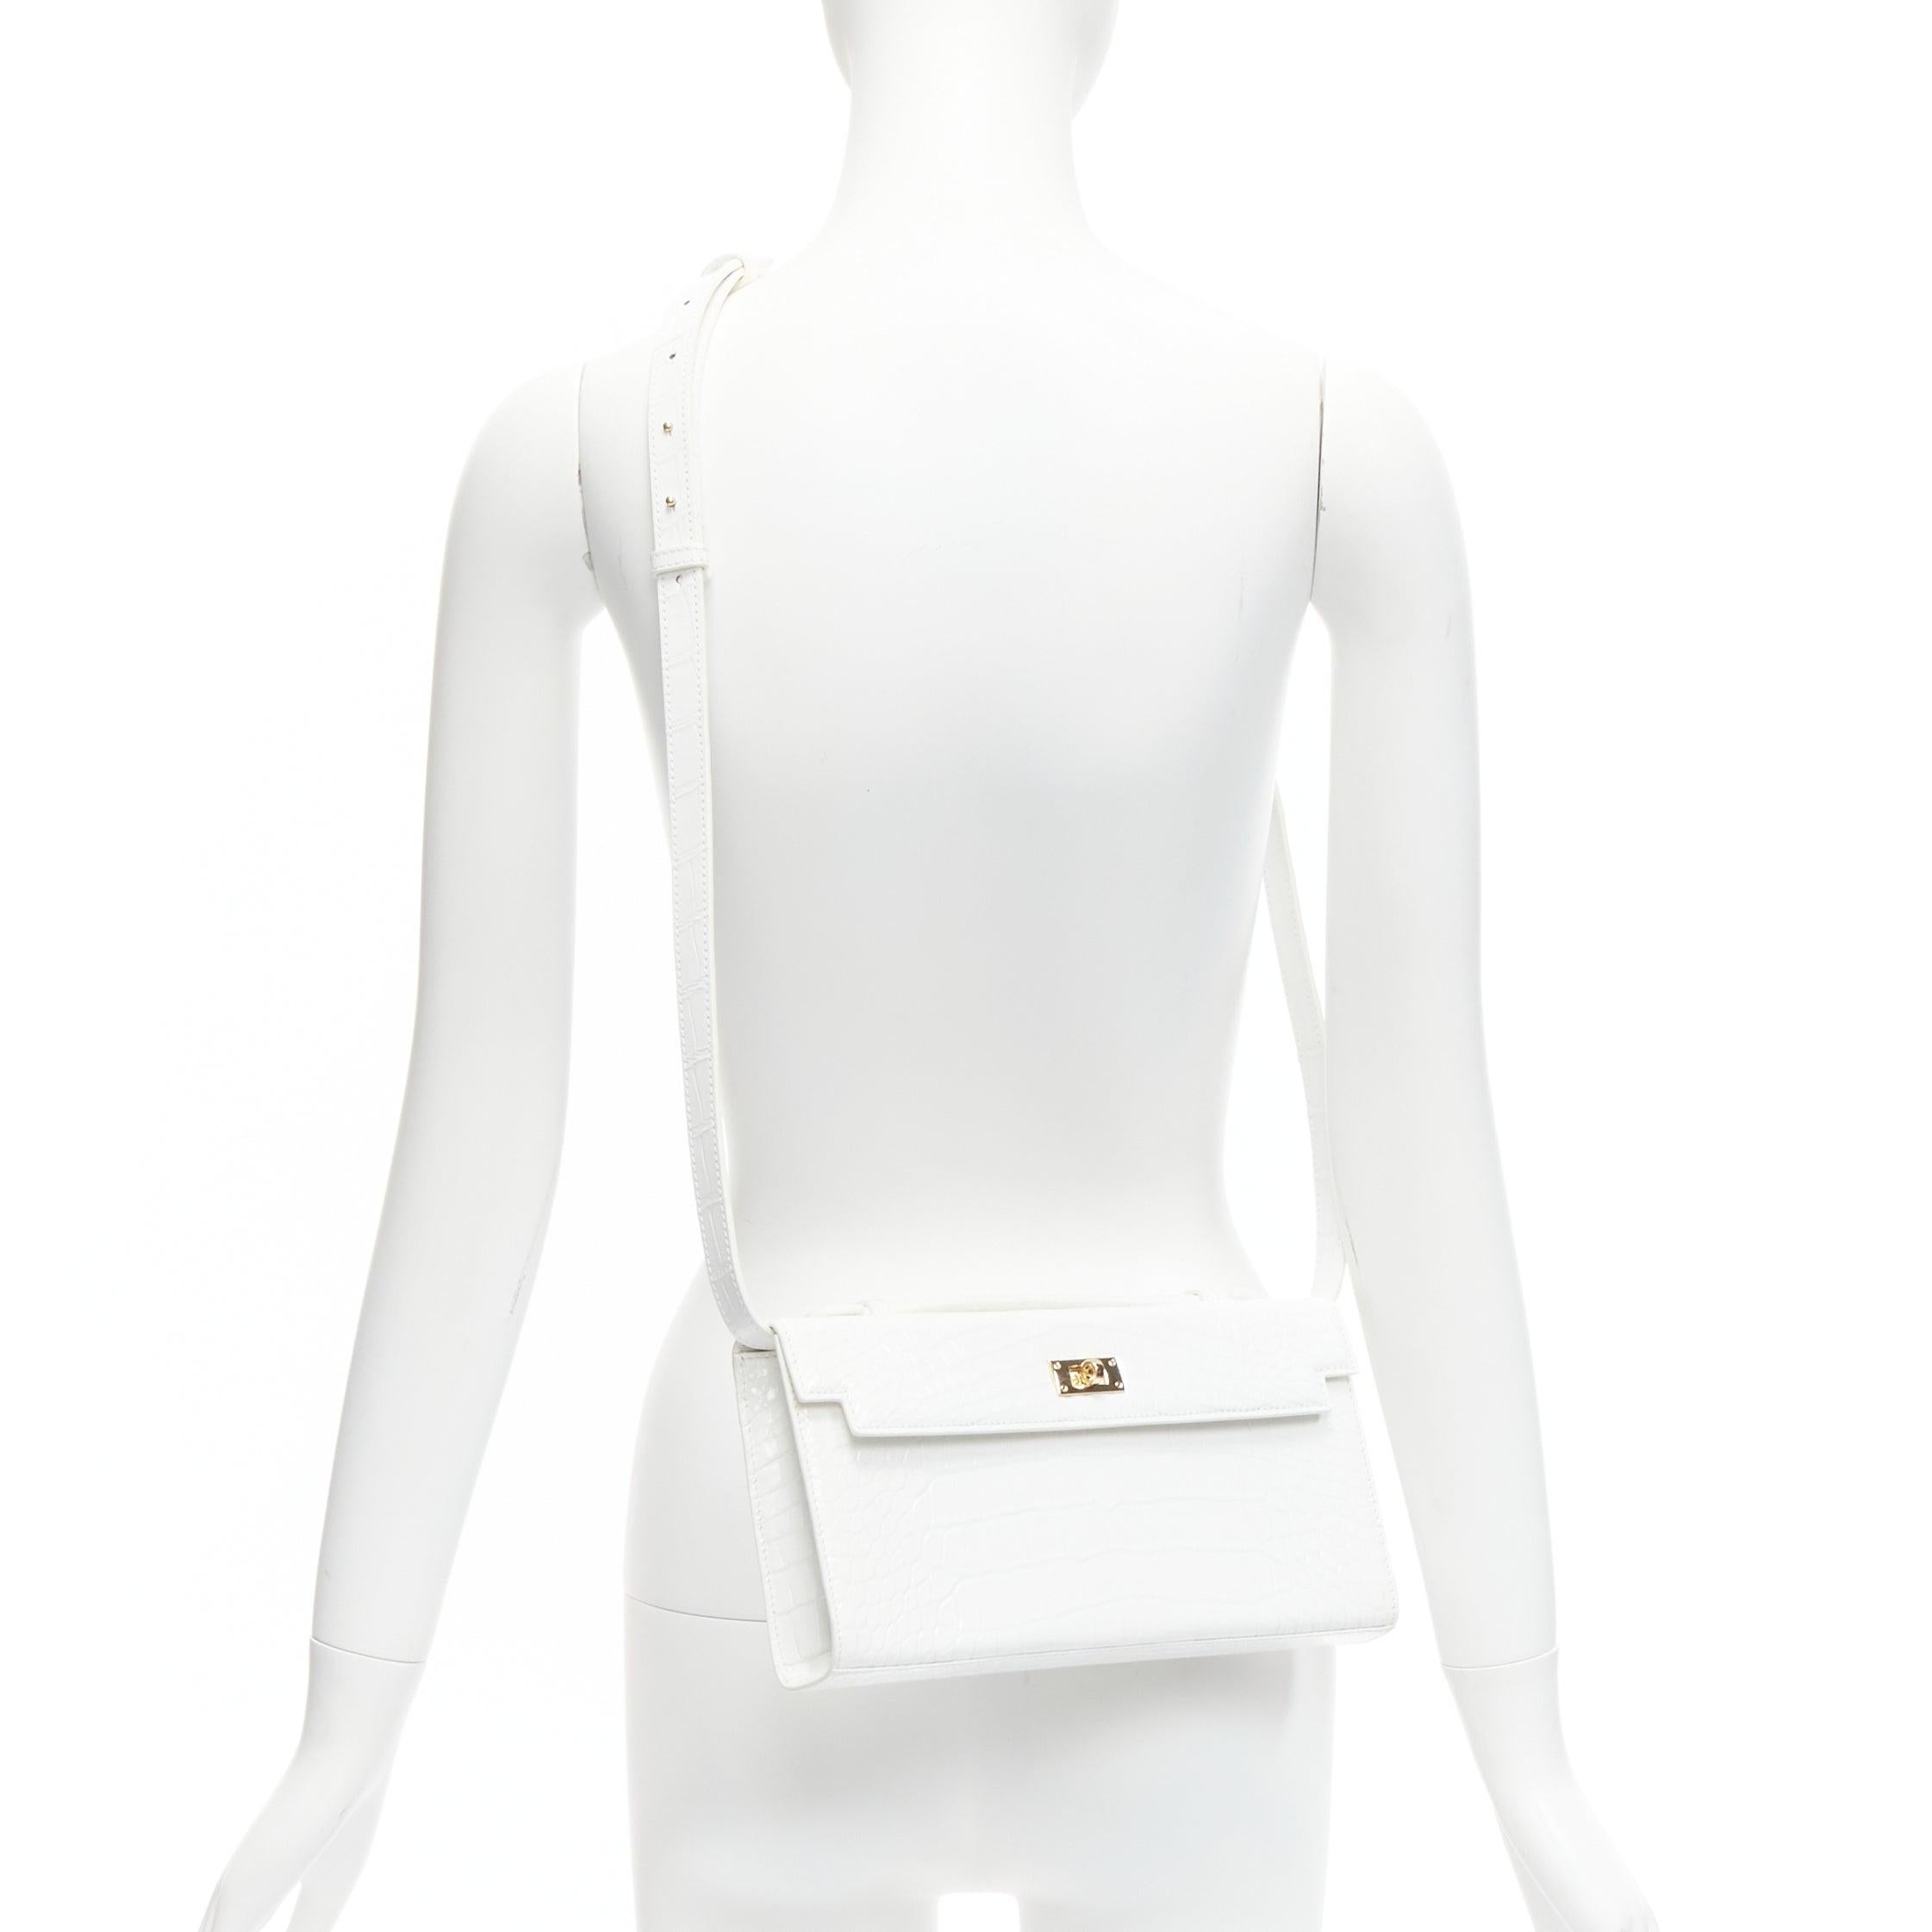 FERIDA YANG Bespoke white matte scaled leather gold buckle long flap clutch
Reference: LNKO/A02223
Brand: Ferida Yang
Collection: Bespoke
Material: Leather
Color: White, Gold
Pattern: Animal Print
Closure: Turnlock
Lining: White Leather
Extra